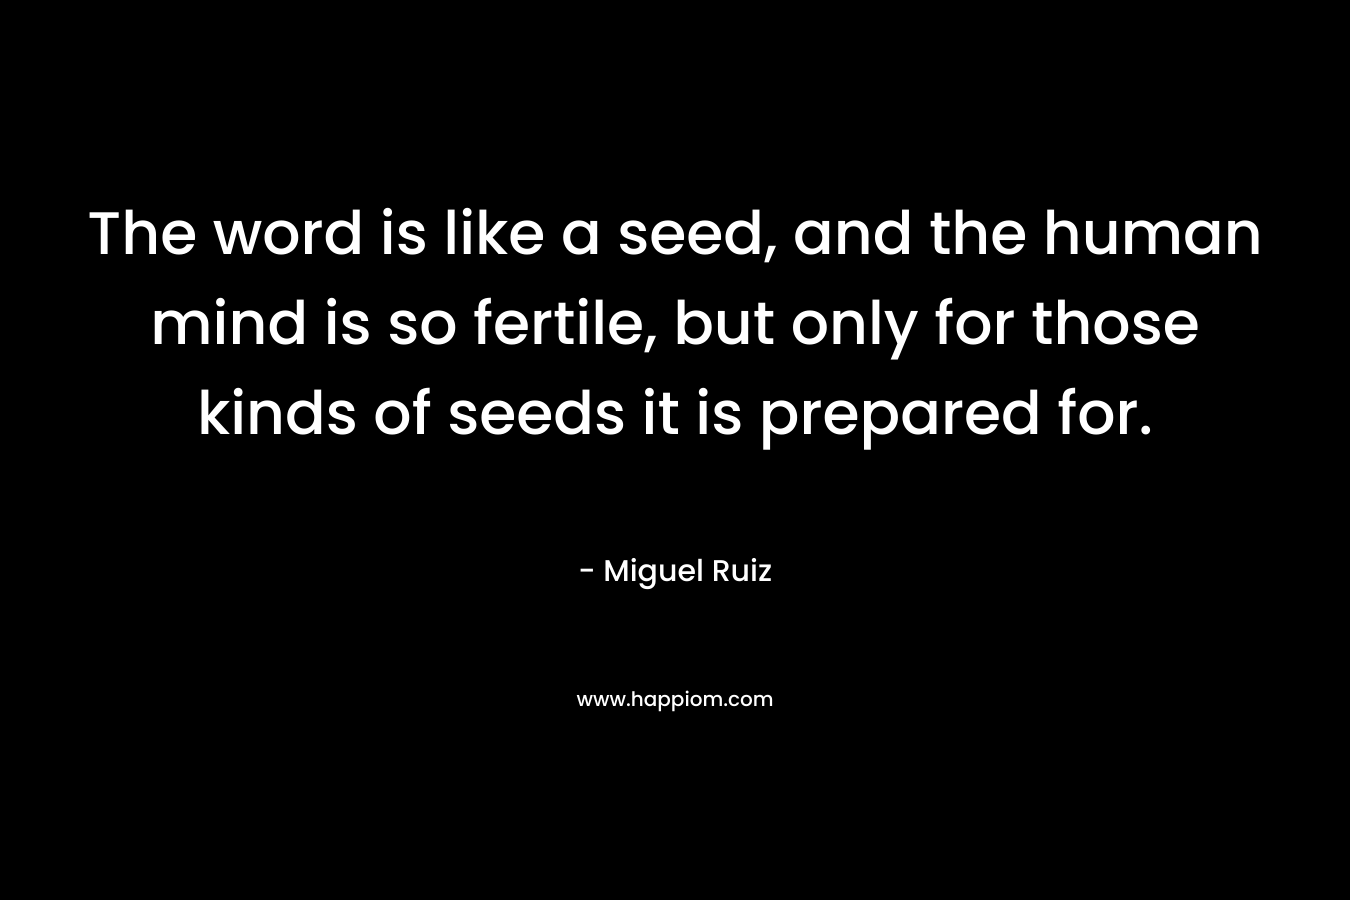 The word is like a seed, and the human mind is so fertile, but only for those kinds of seeds it is prepared for.